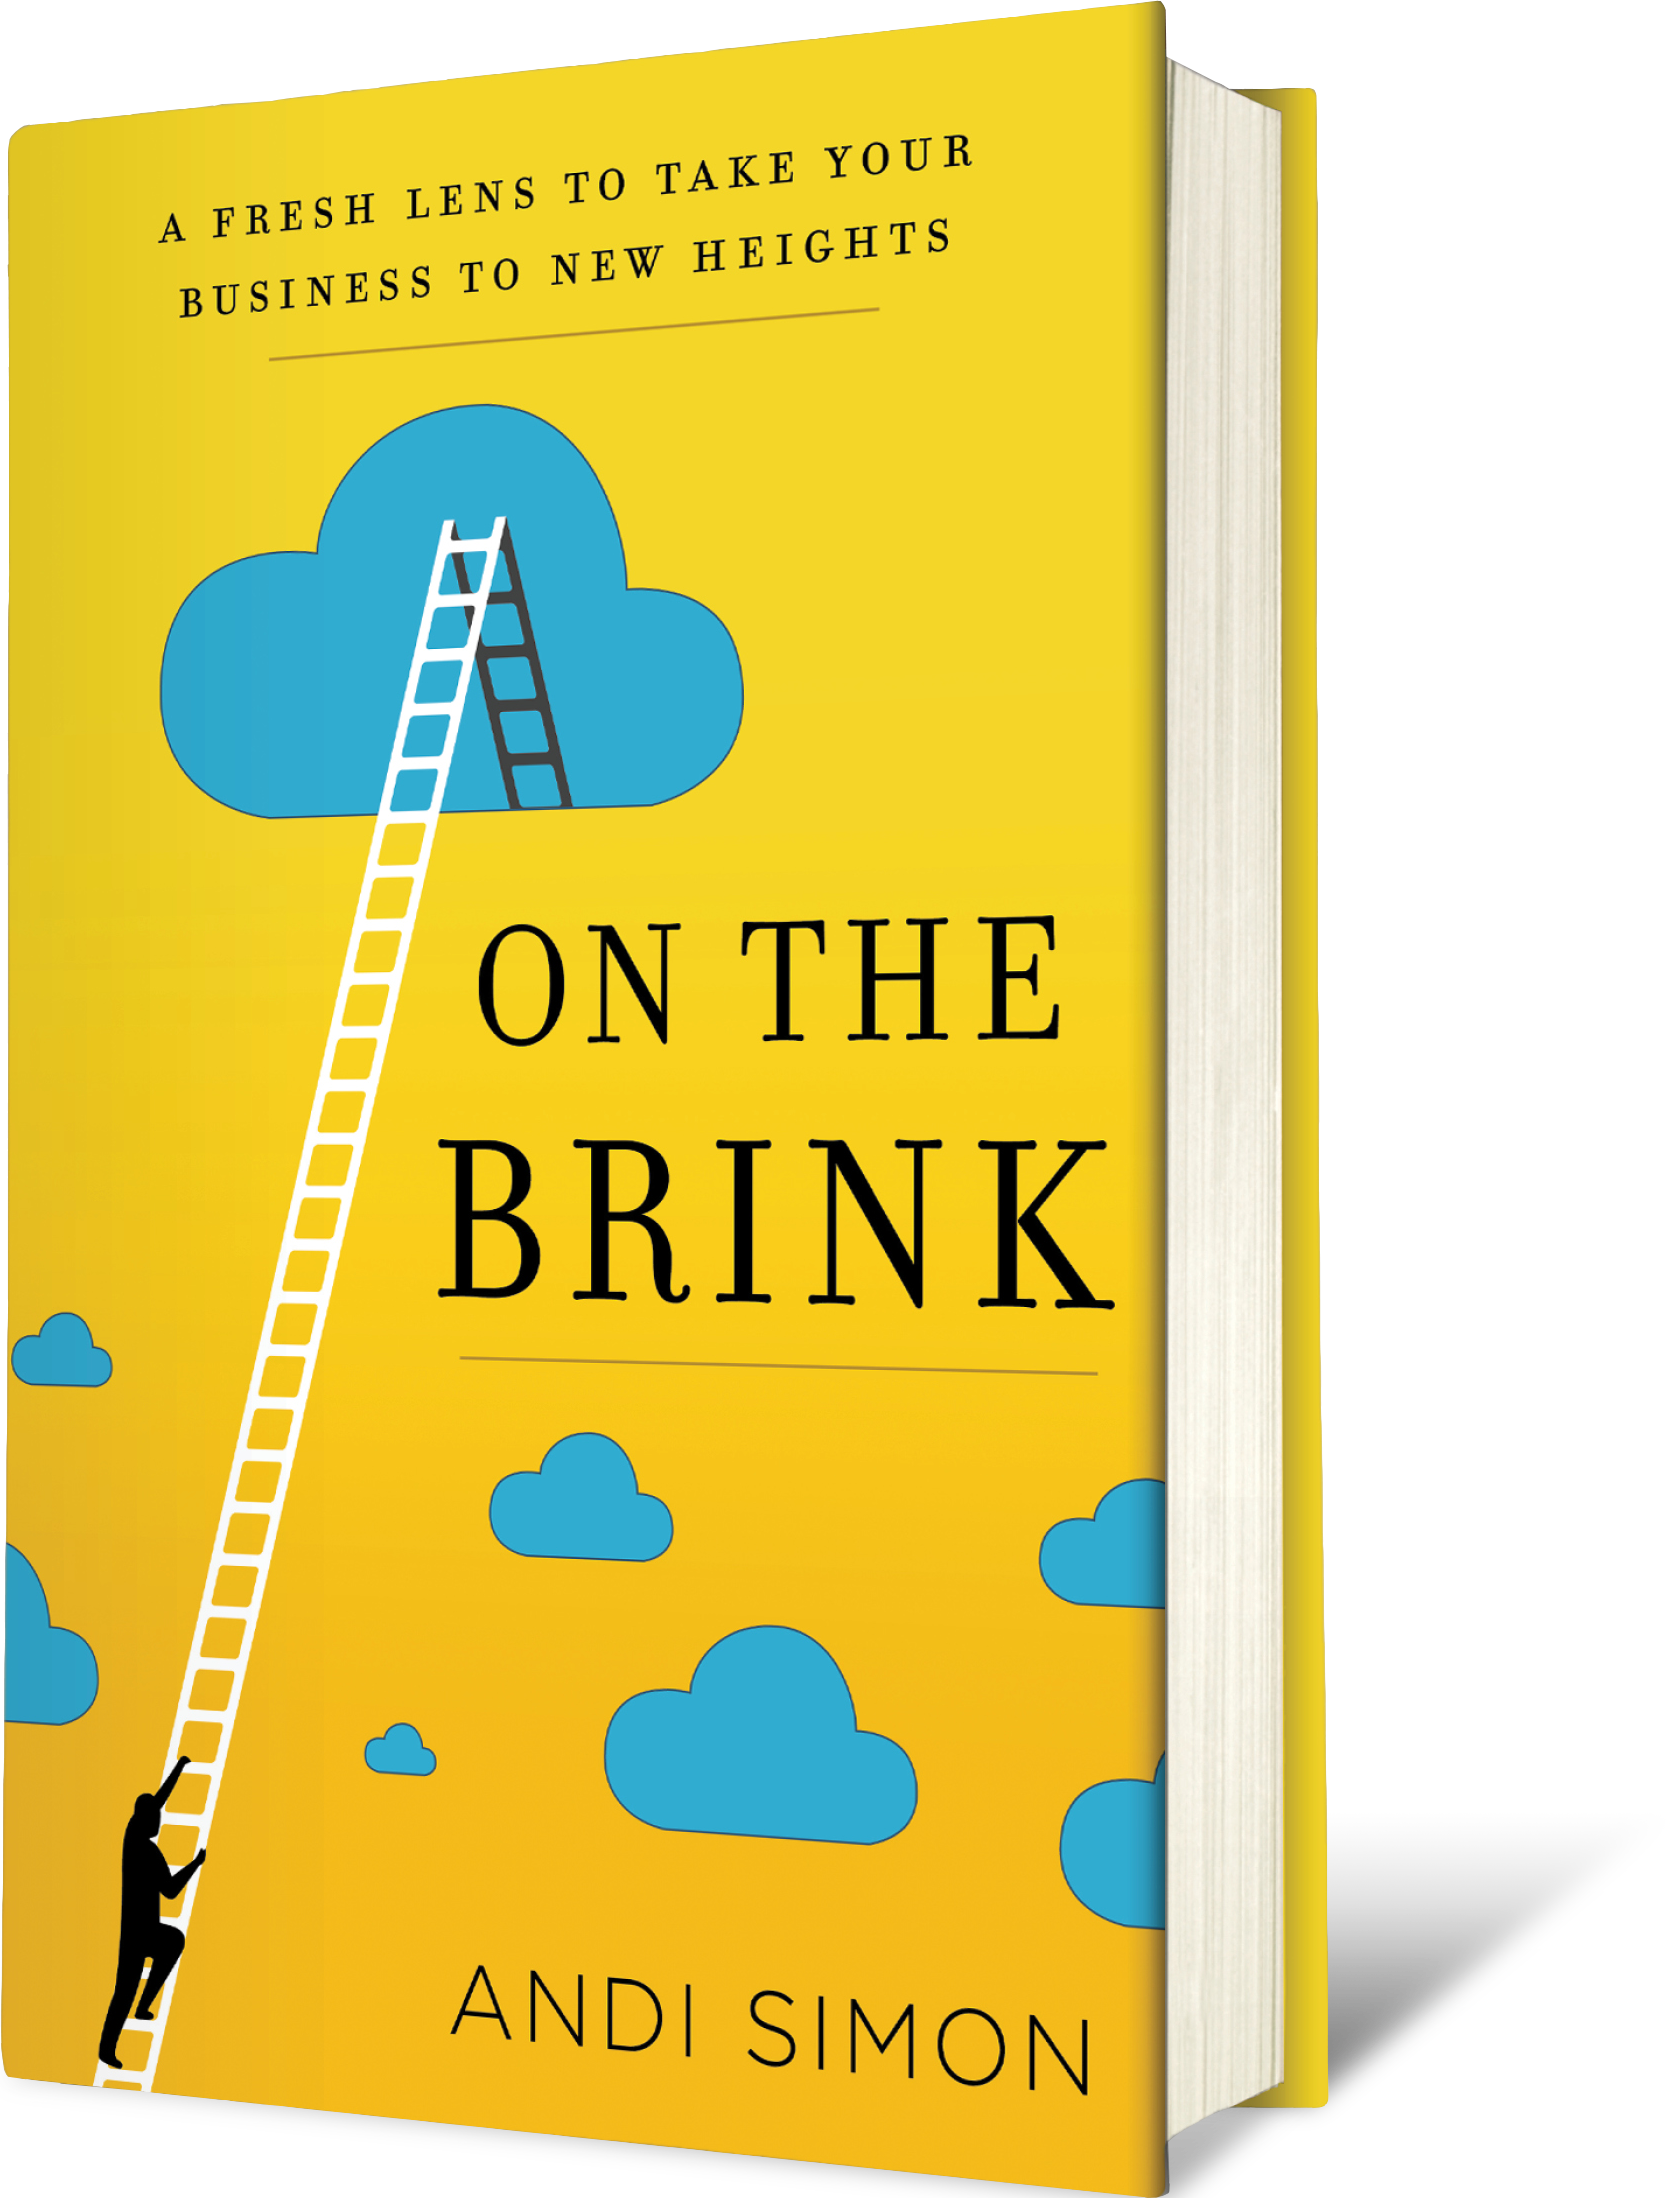 Andi Simon's book "On the Brink: A Fresh Lens to Take Your Business to New Heights"